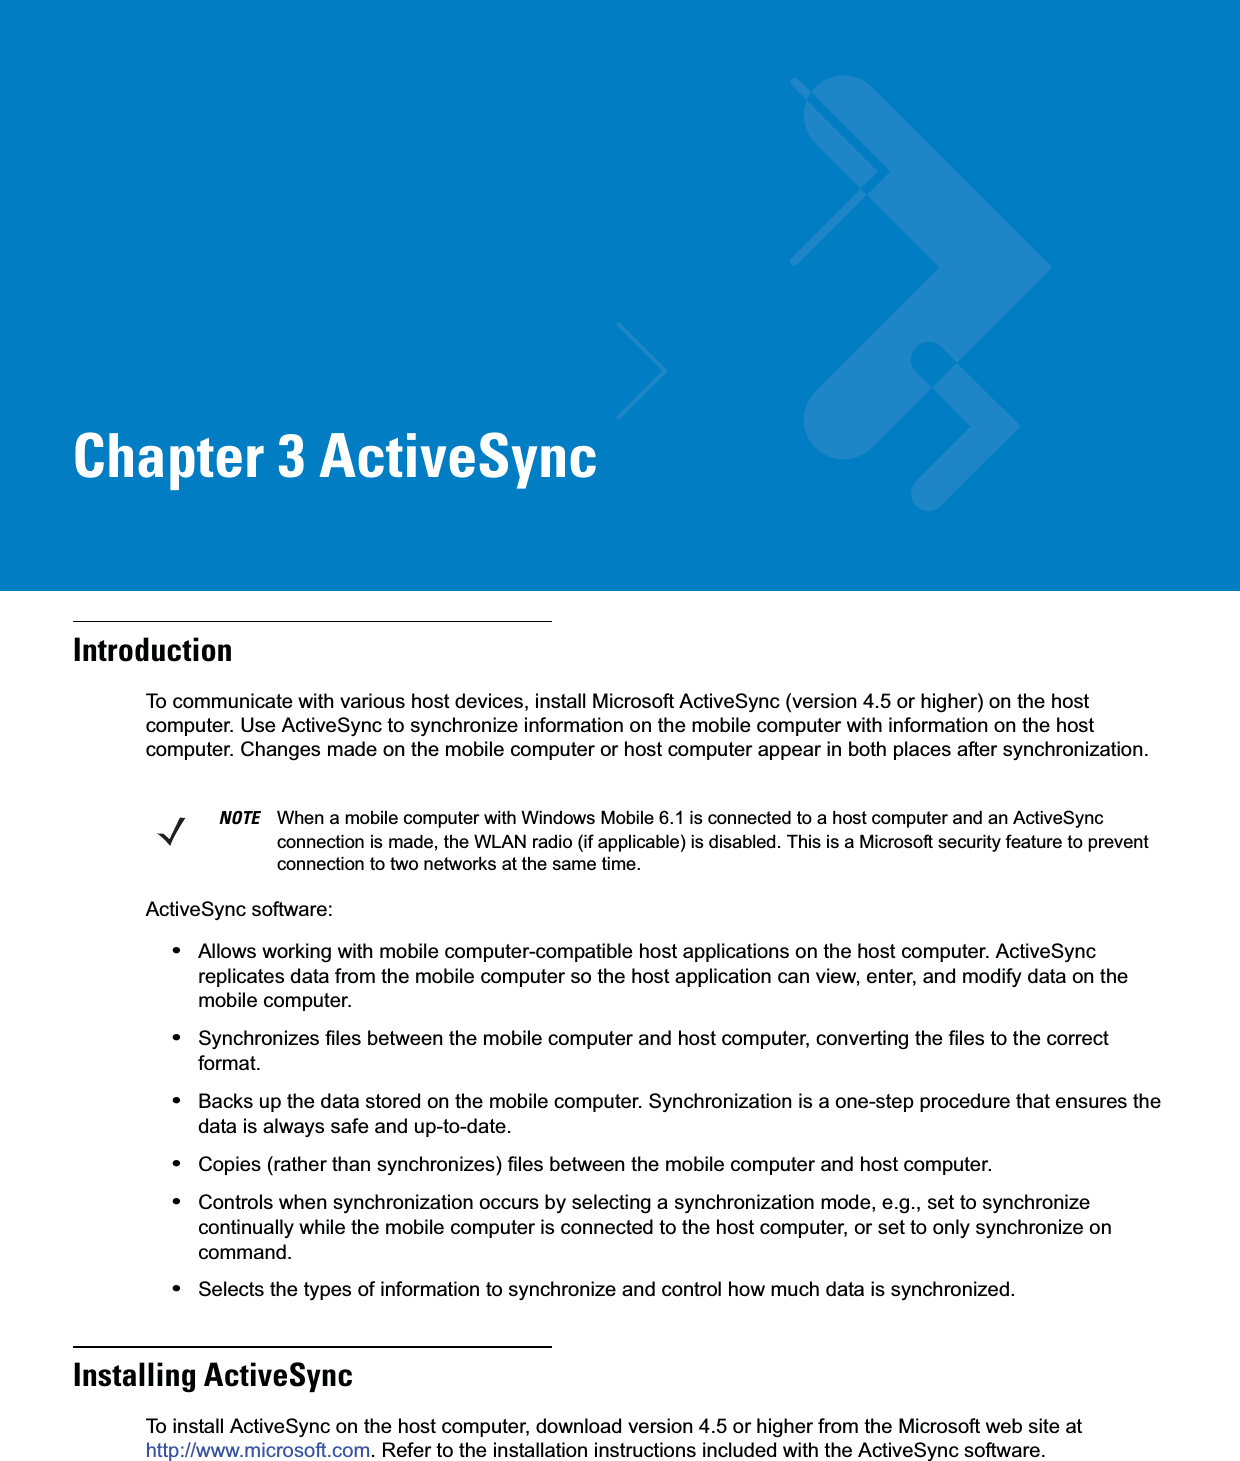 Chapter 3 ActiveSyncIntroductionTo communicate with various host devices, install Microsoft ActiveSync (version 4.5 or higher) on the host computer. Use ActiveSync to synchronize information on the mobile computer with information on the host computer. Changes made on the mobile computer or host computer appear in both places after synchronization.ActiveSync software:•Allows working with mobile computer-compatible host applications on the host computer. ActiveSync replicates data from the mobile computer so the host application can view, enter, and modify data on the mobile computer.•Synchronizes files between the mobile computer and host computer, converting the files to the correct format.•Backs up the data stored on the mobile computer. Synchronization is a one-step procedure that ensures the data is always safe and up-to-date.•Copies (rather than synchronizes) files between the mobile computer and host computer.•Controls when synchronization occurs by selecting a synchronization mode, e.g., set to synchronize continually while the mobile computer is connected to the host computer, or set to only synchronize on command.•Selects the types of information to synchronize and control how much data is synchronized.Installing ActiveSyncTo install ActiveSync on the host computer, download version 4.5 or higher from the Microsoft web site at http://www.microsoft.com. Refer to the installation instructions included with the ActiveSync software.NOTE When a mobile computer with Windows Mobile 6.1 is connected to a host computer and an ActiveSync connection is made, the WLAN radio (if applicable) is disabled. This is a Microsoft security feature to prevent connection to two networks at the same time.